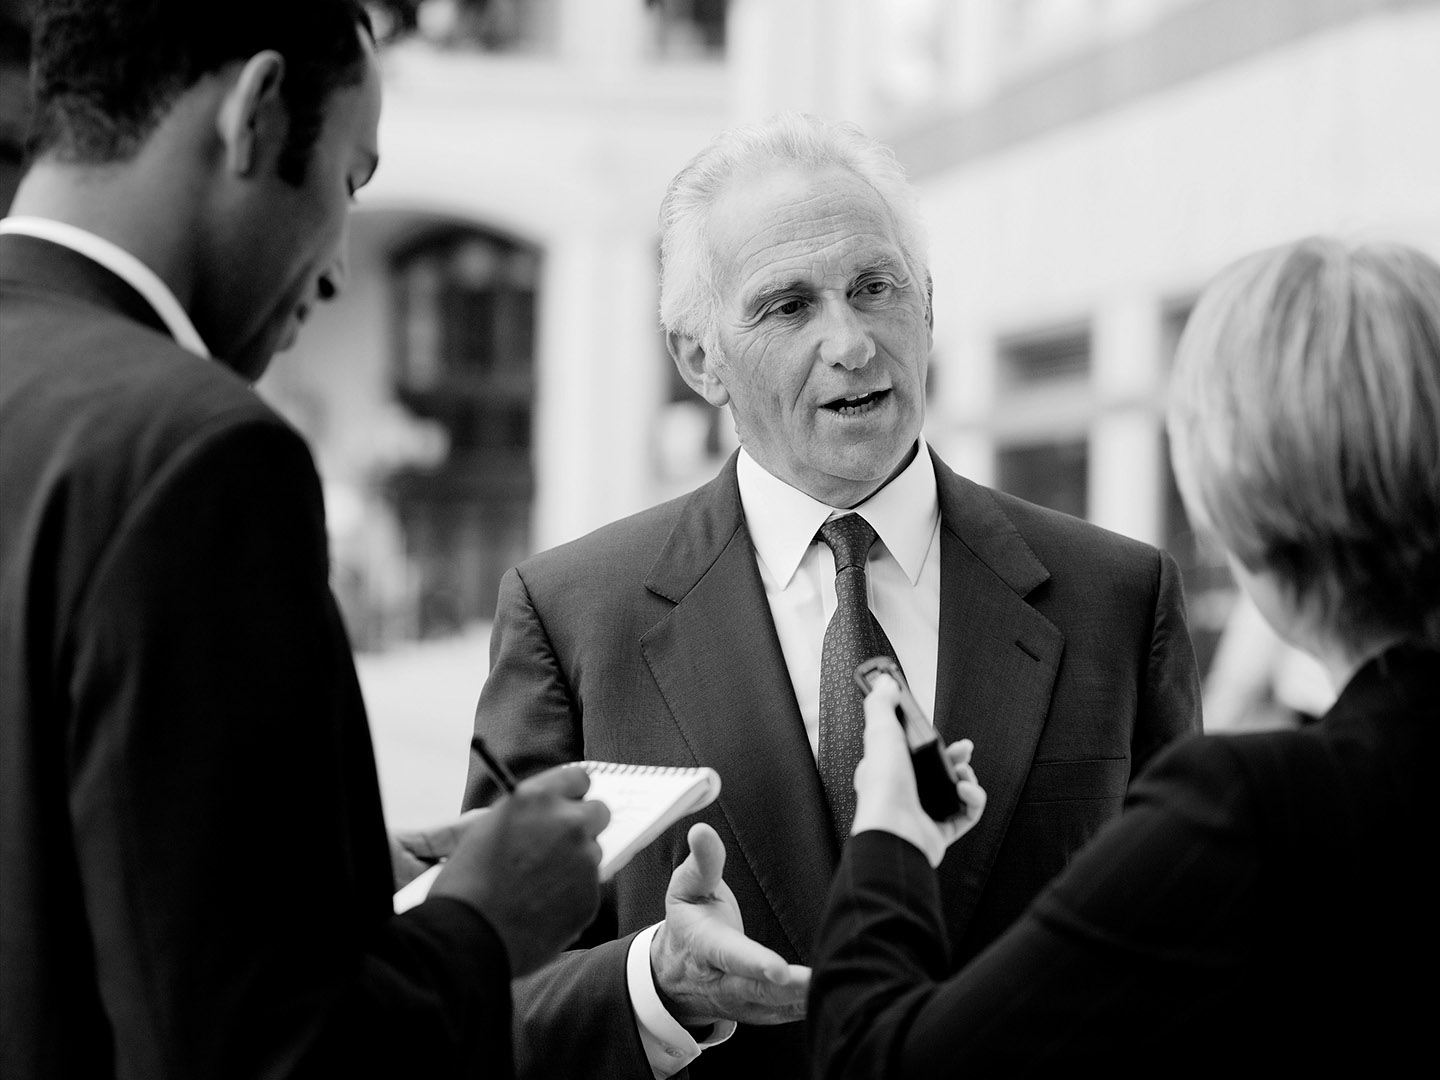 B&W reportage style shot of businessman being interviewed